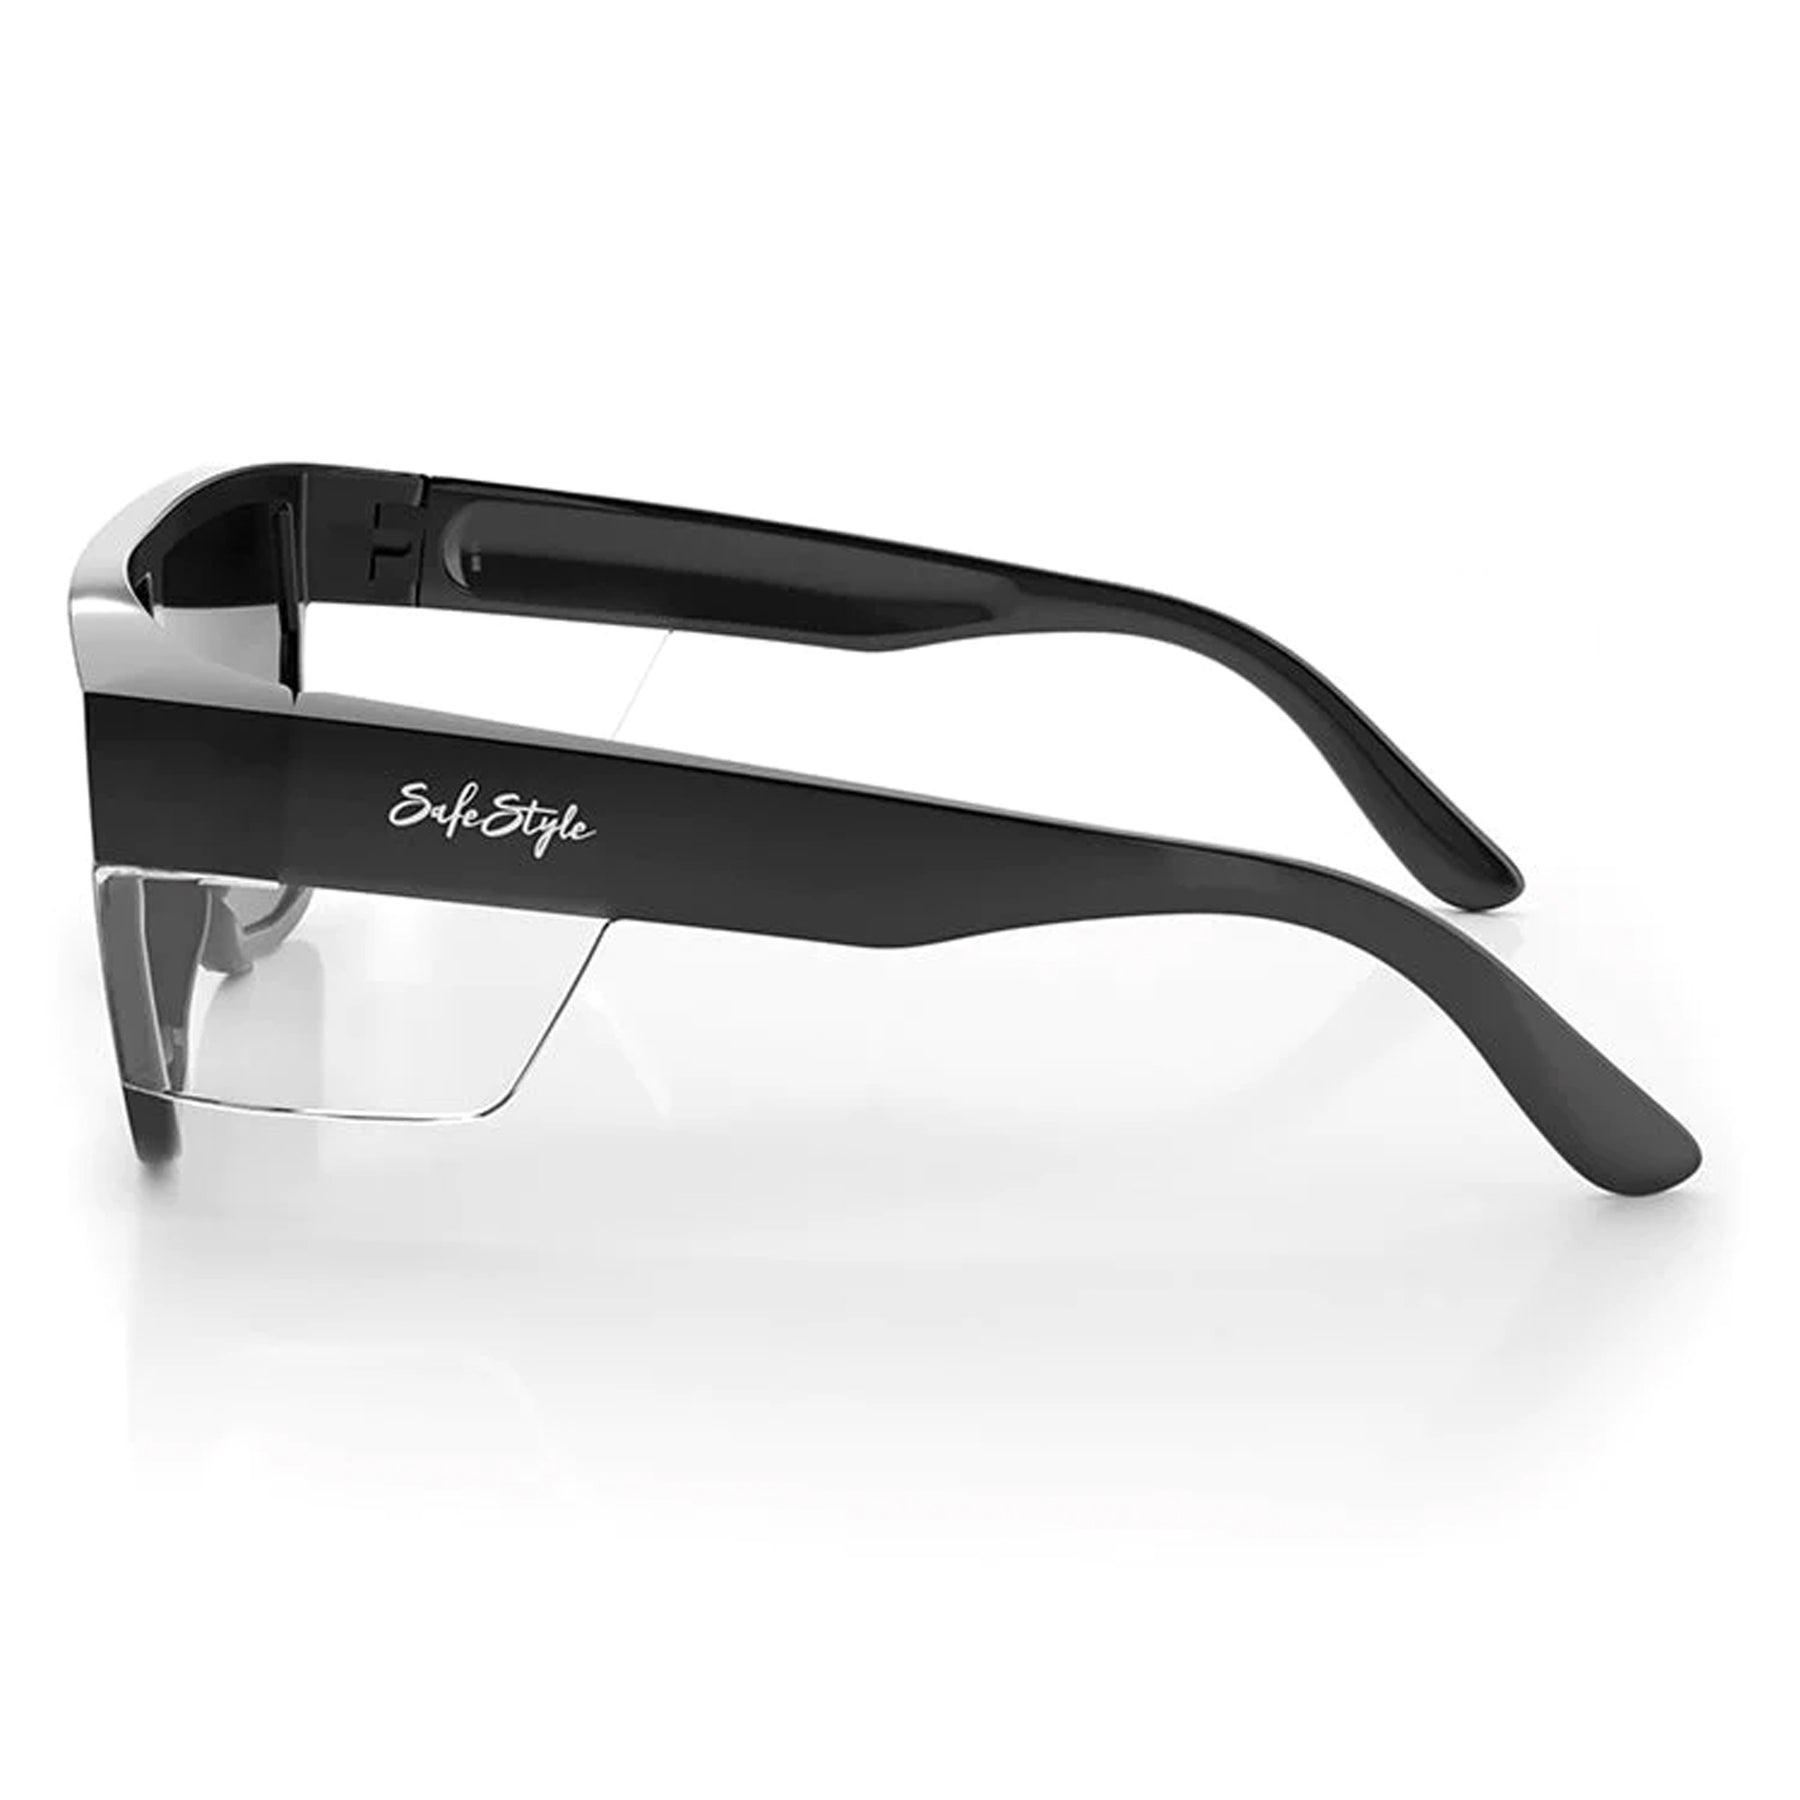 safestyle primes black frame with tinted glasses